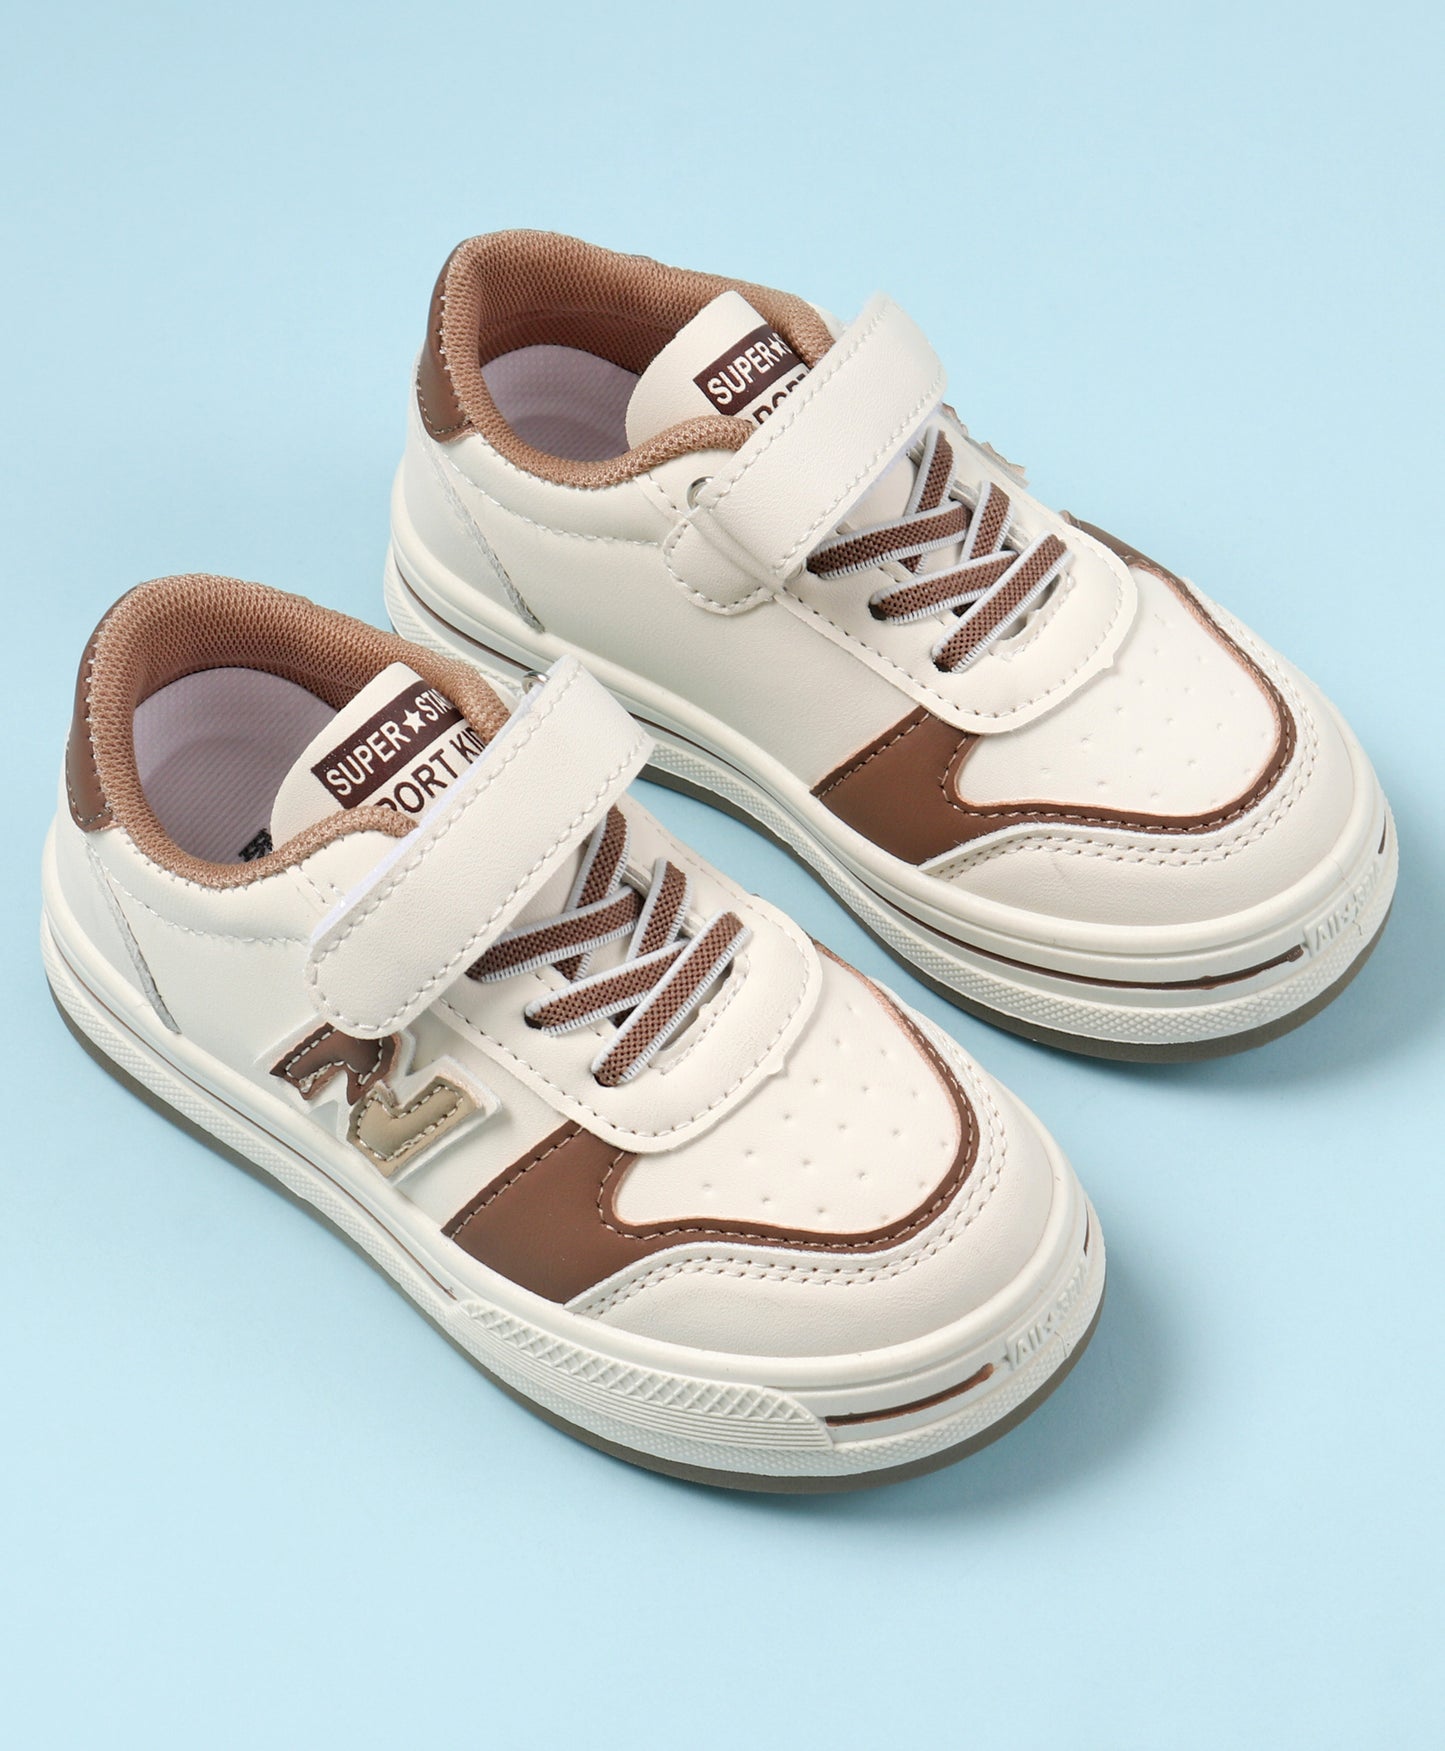 N PATCH VELCRO CLOSURE SNEAKERS - WHITE & BROWN